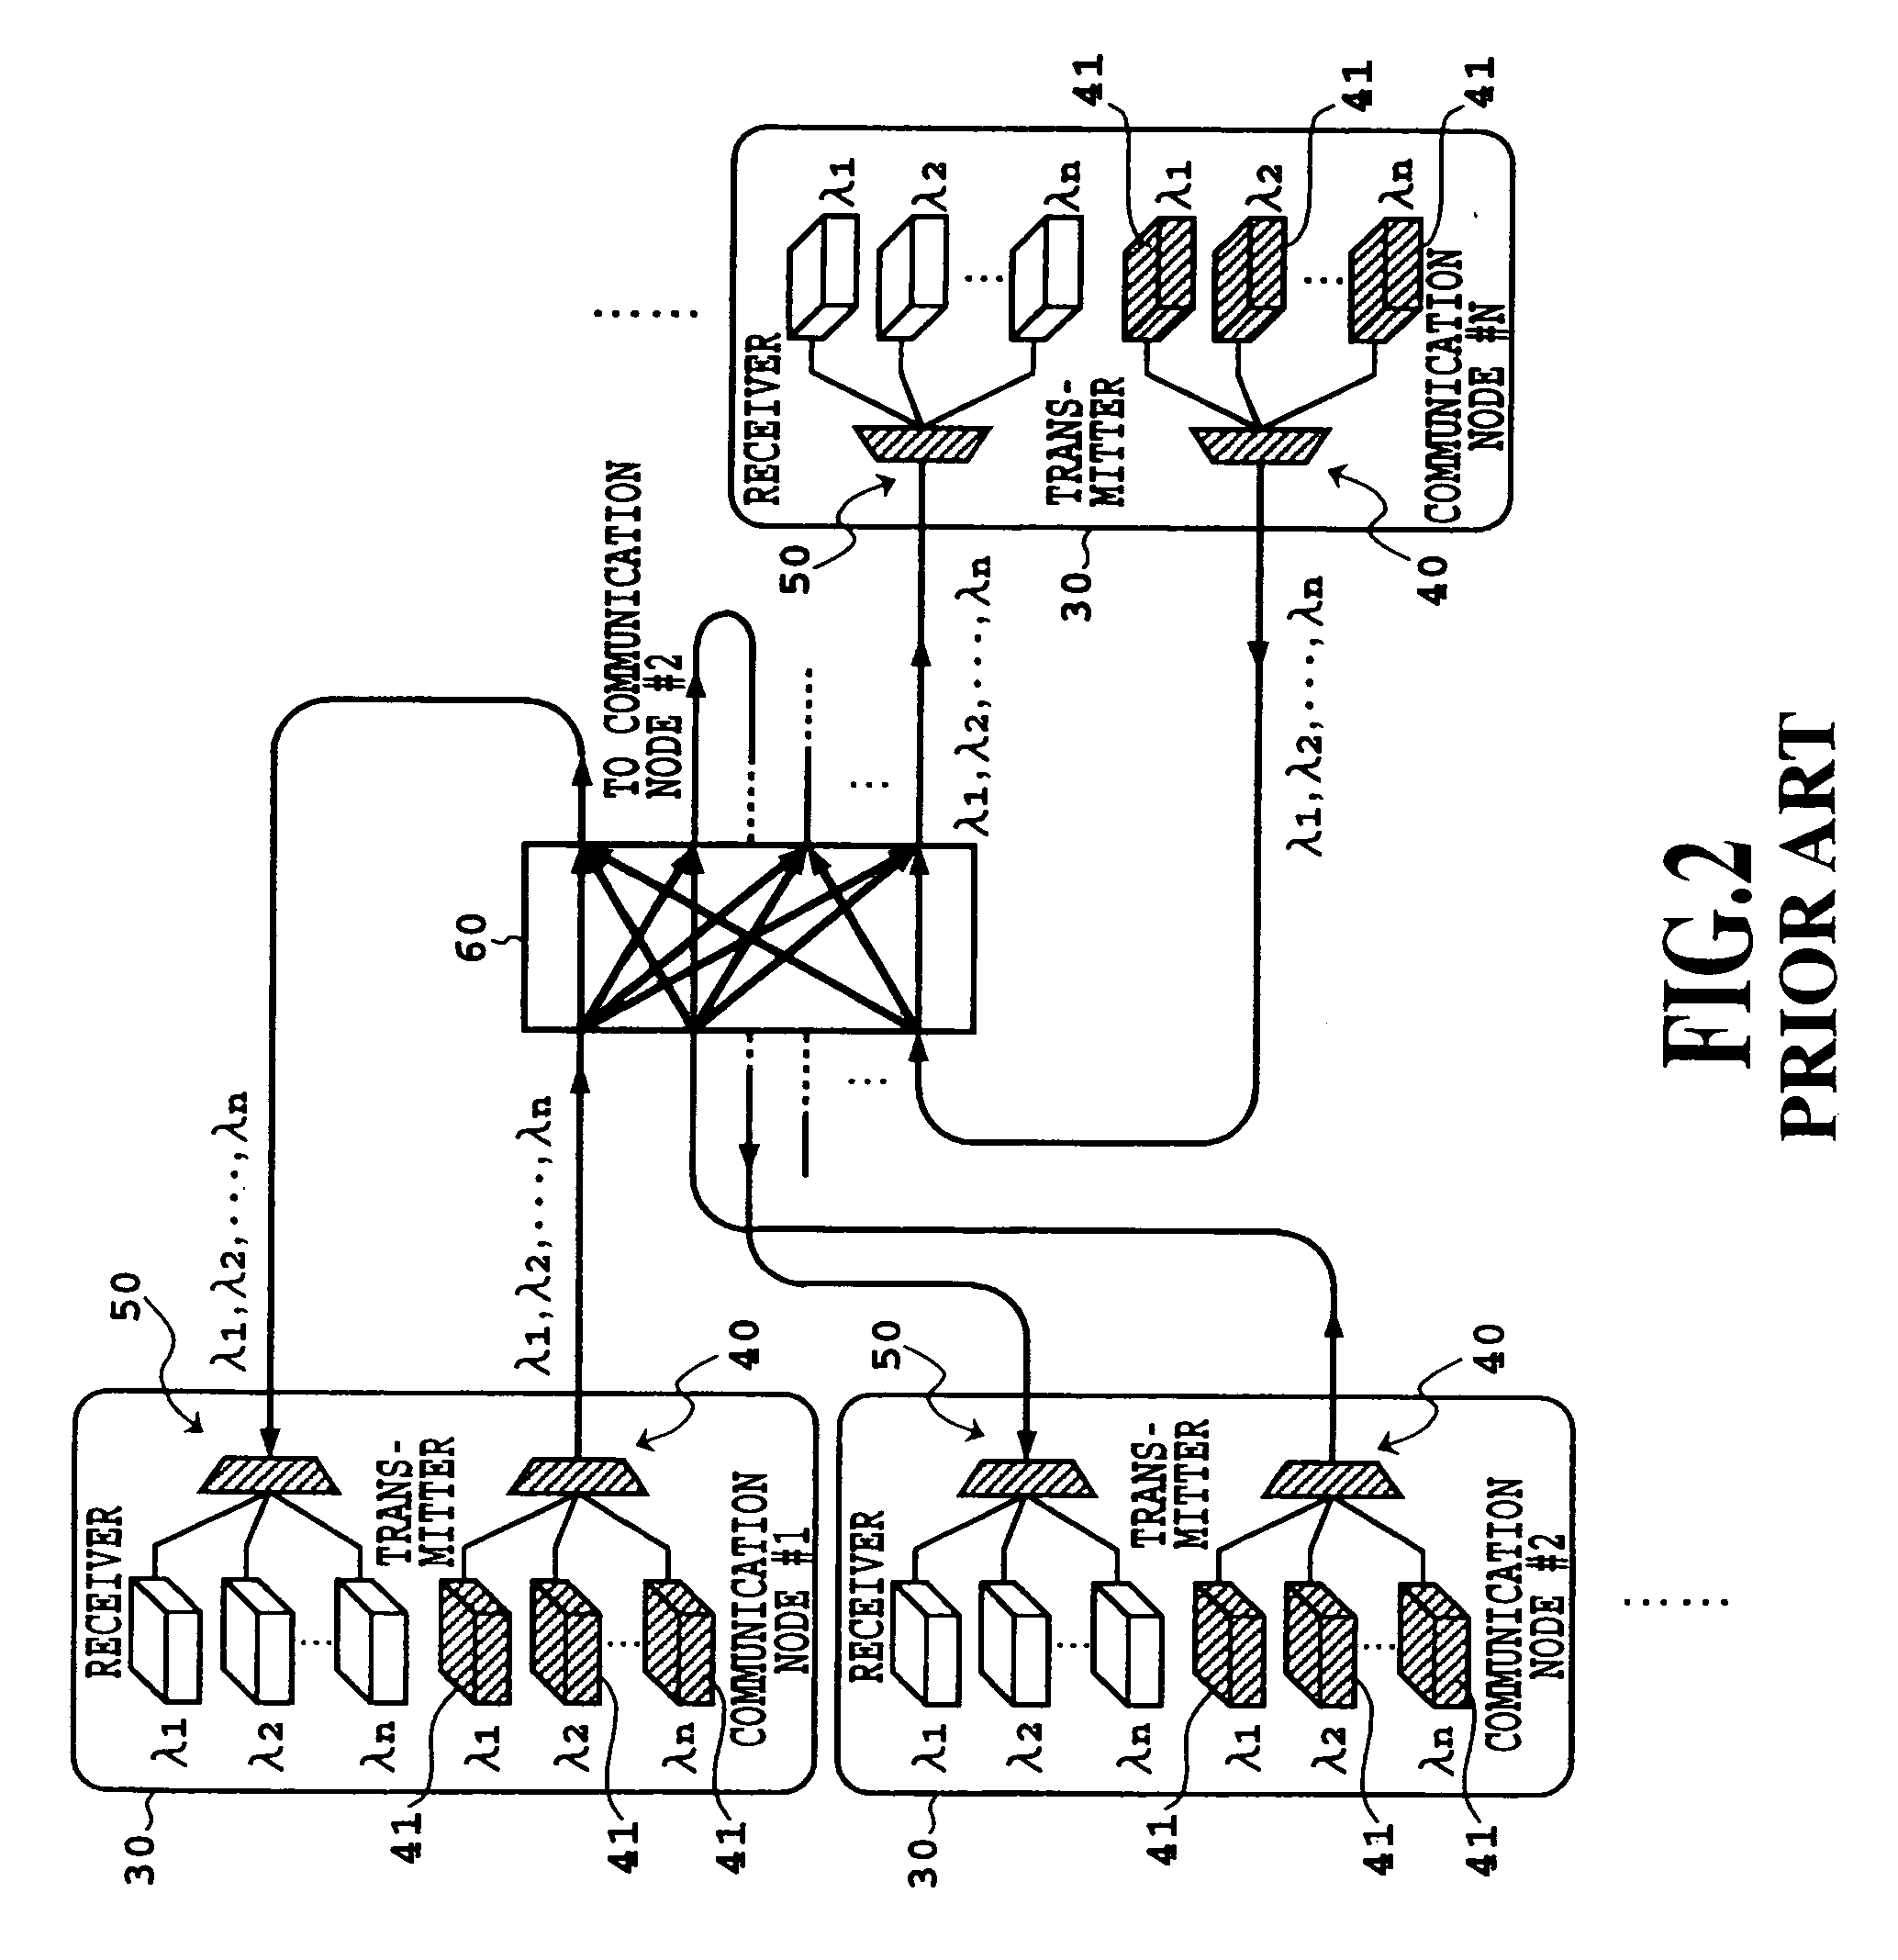 Optical packet routing network system based on optical label switching technique